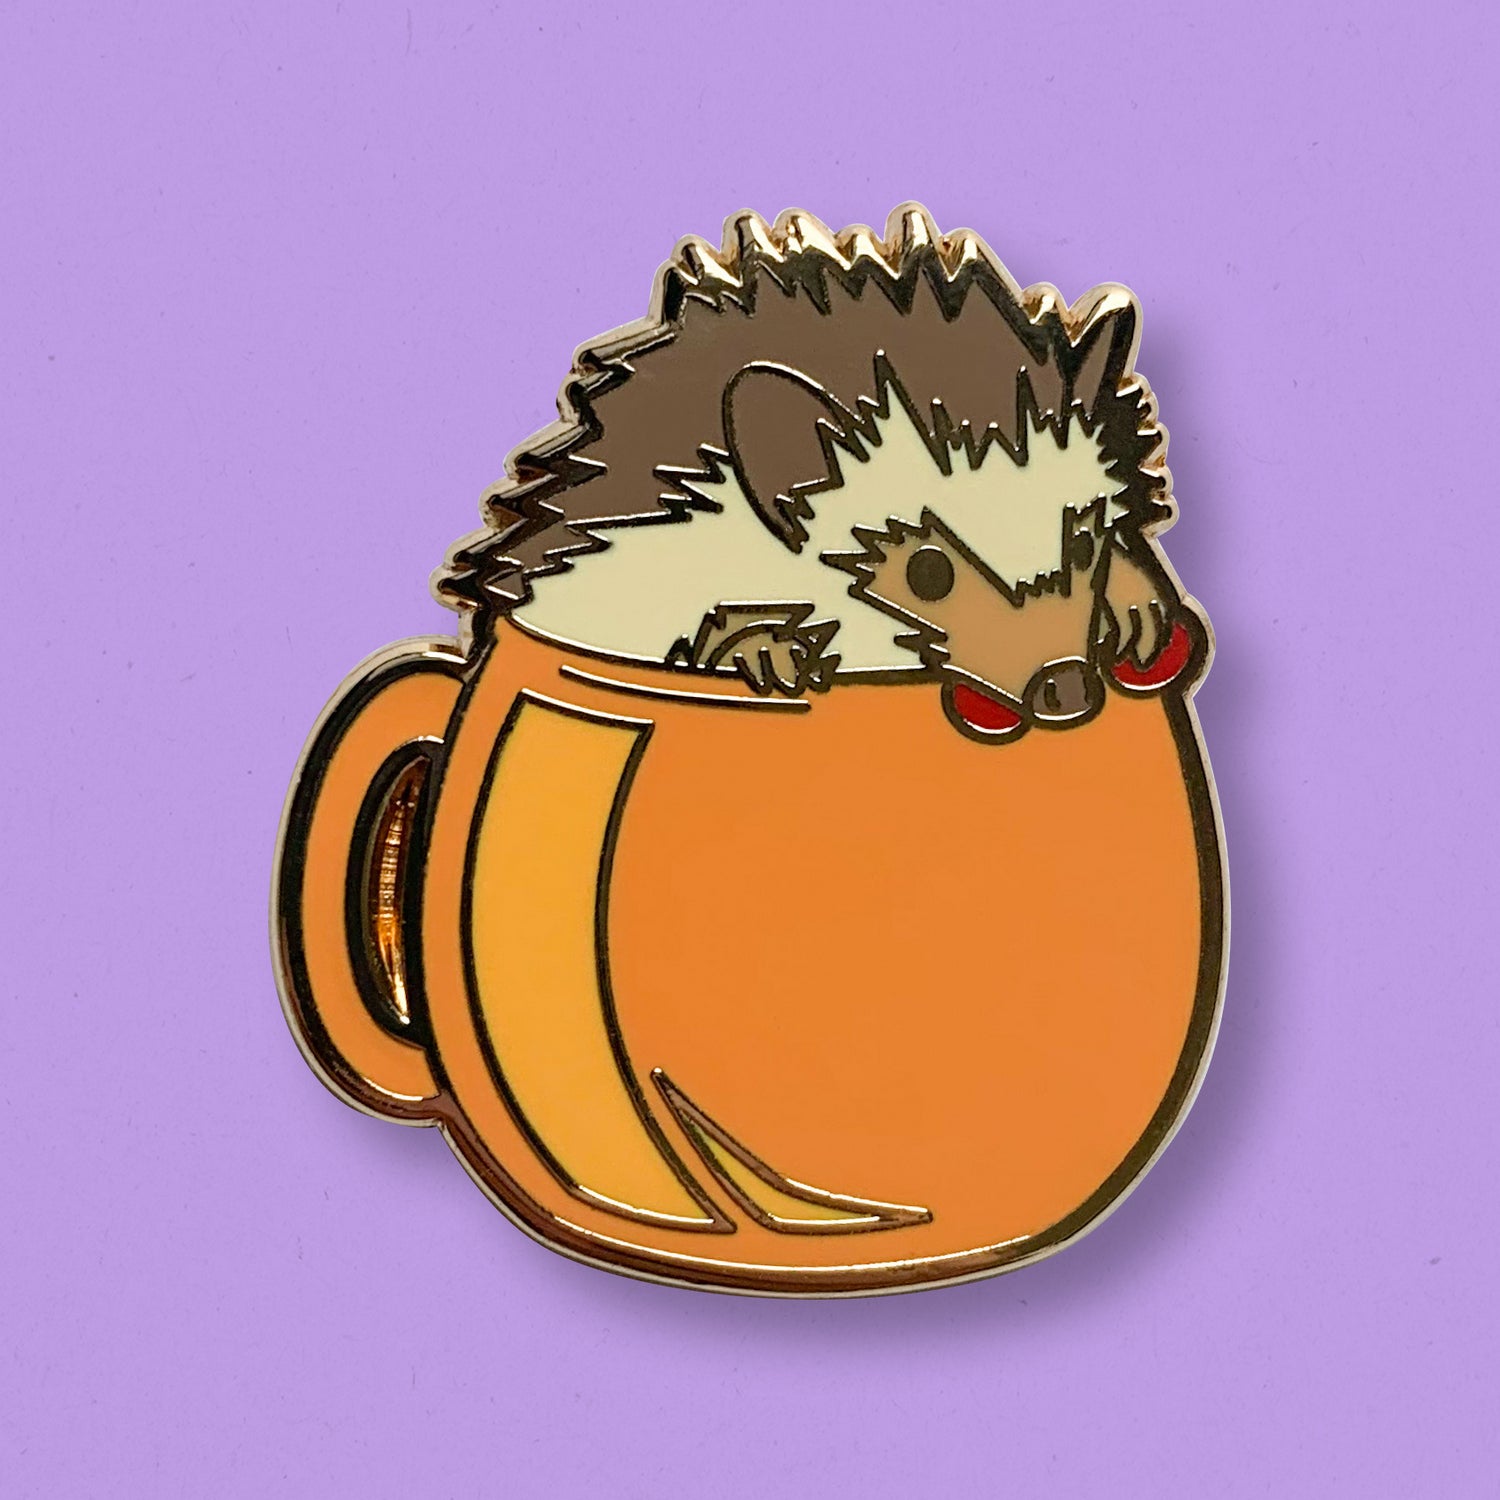 Hedgehog & Pomegranate Punch Cocktail Hard Enamel Pin by Cocktail Critters